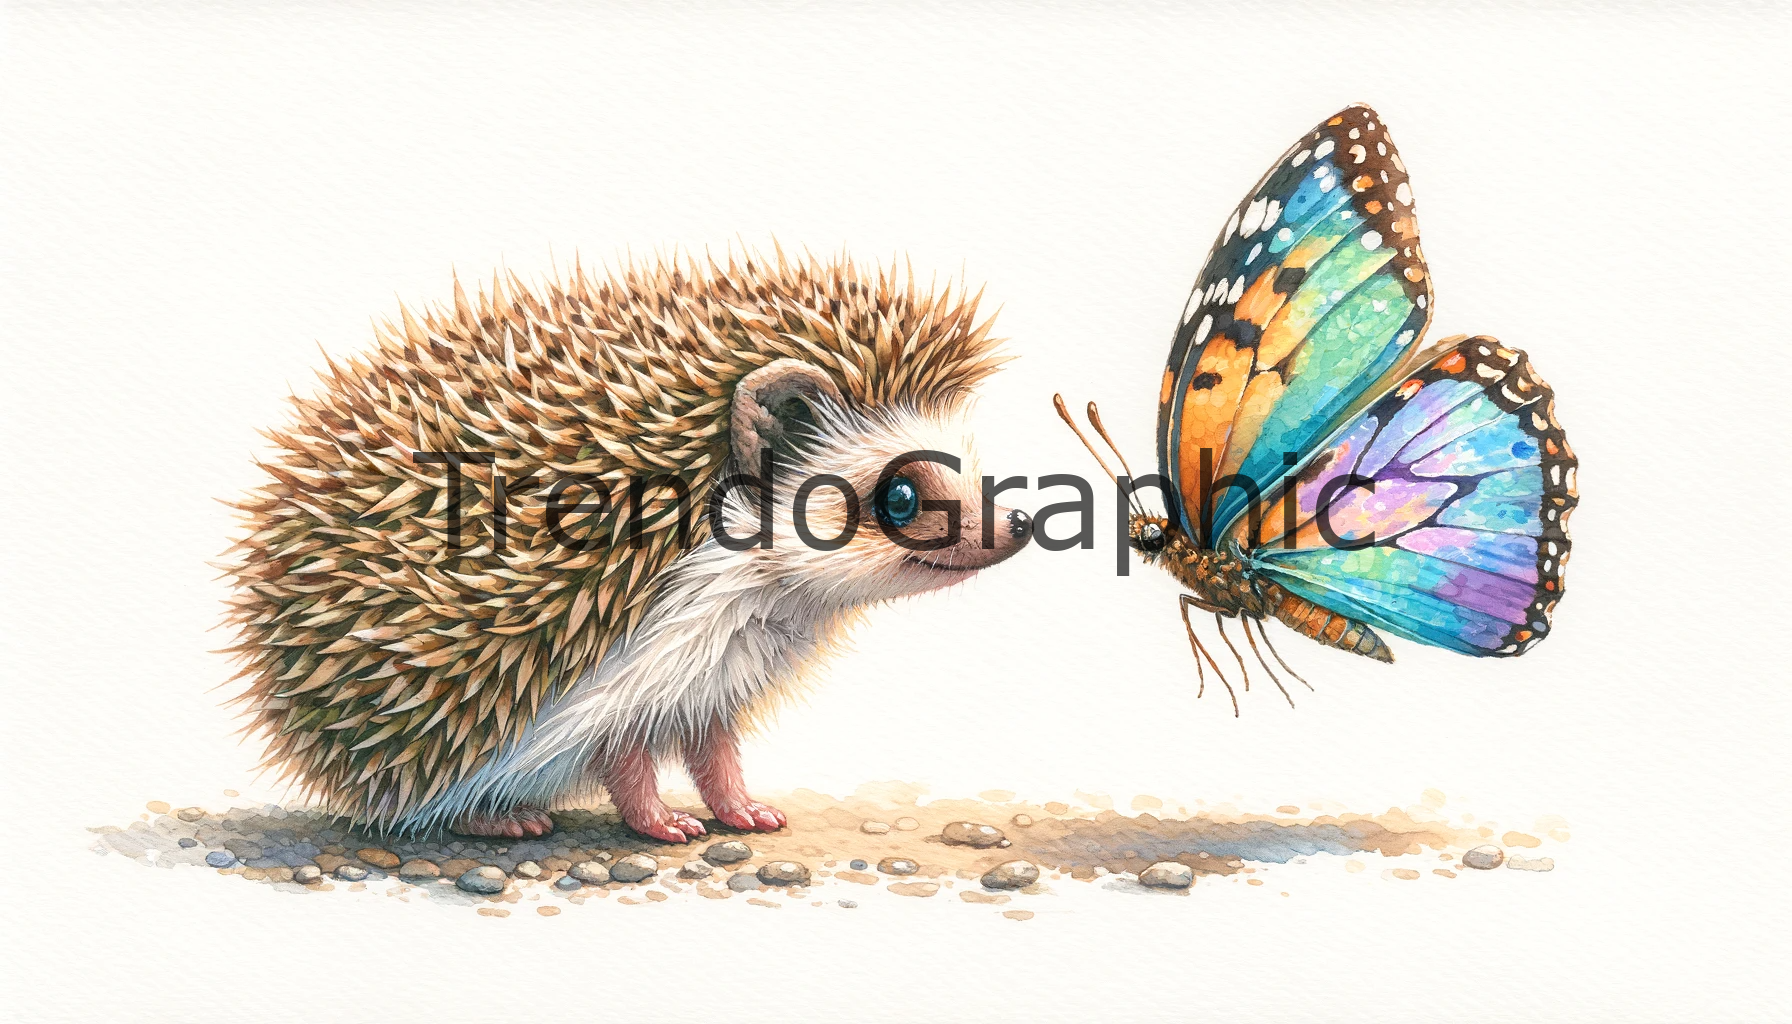 A Hedgehog’s Whimsical Encounter with a Butterfly